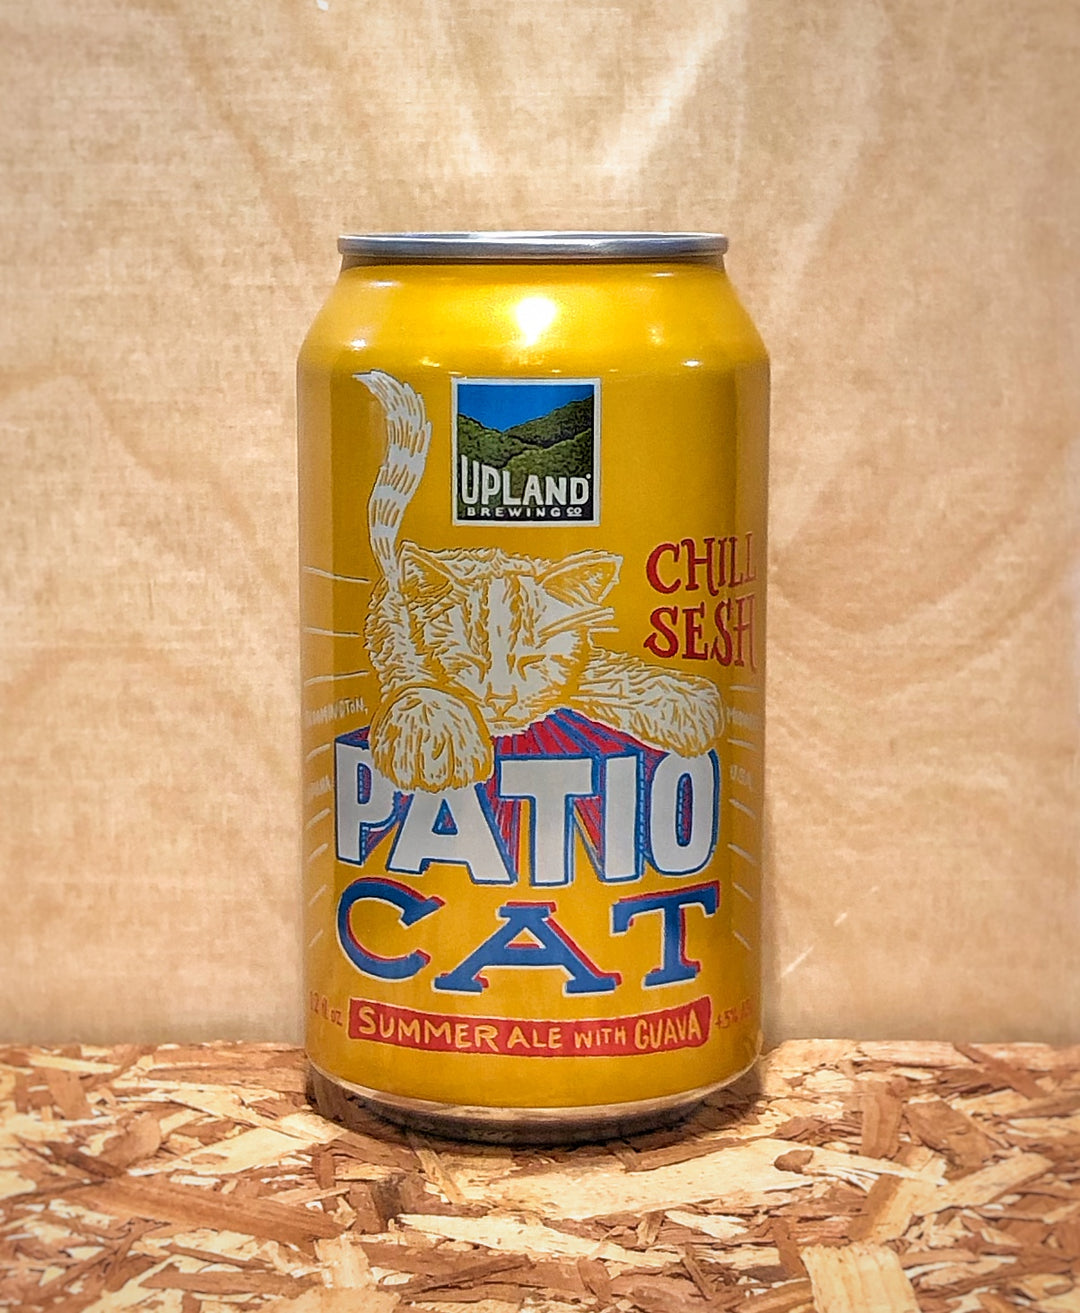 Upland Brewing 'Patio Cat' Summer Ale with Guava (Bloomington, IN)